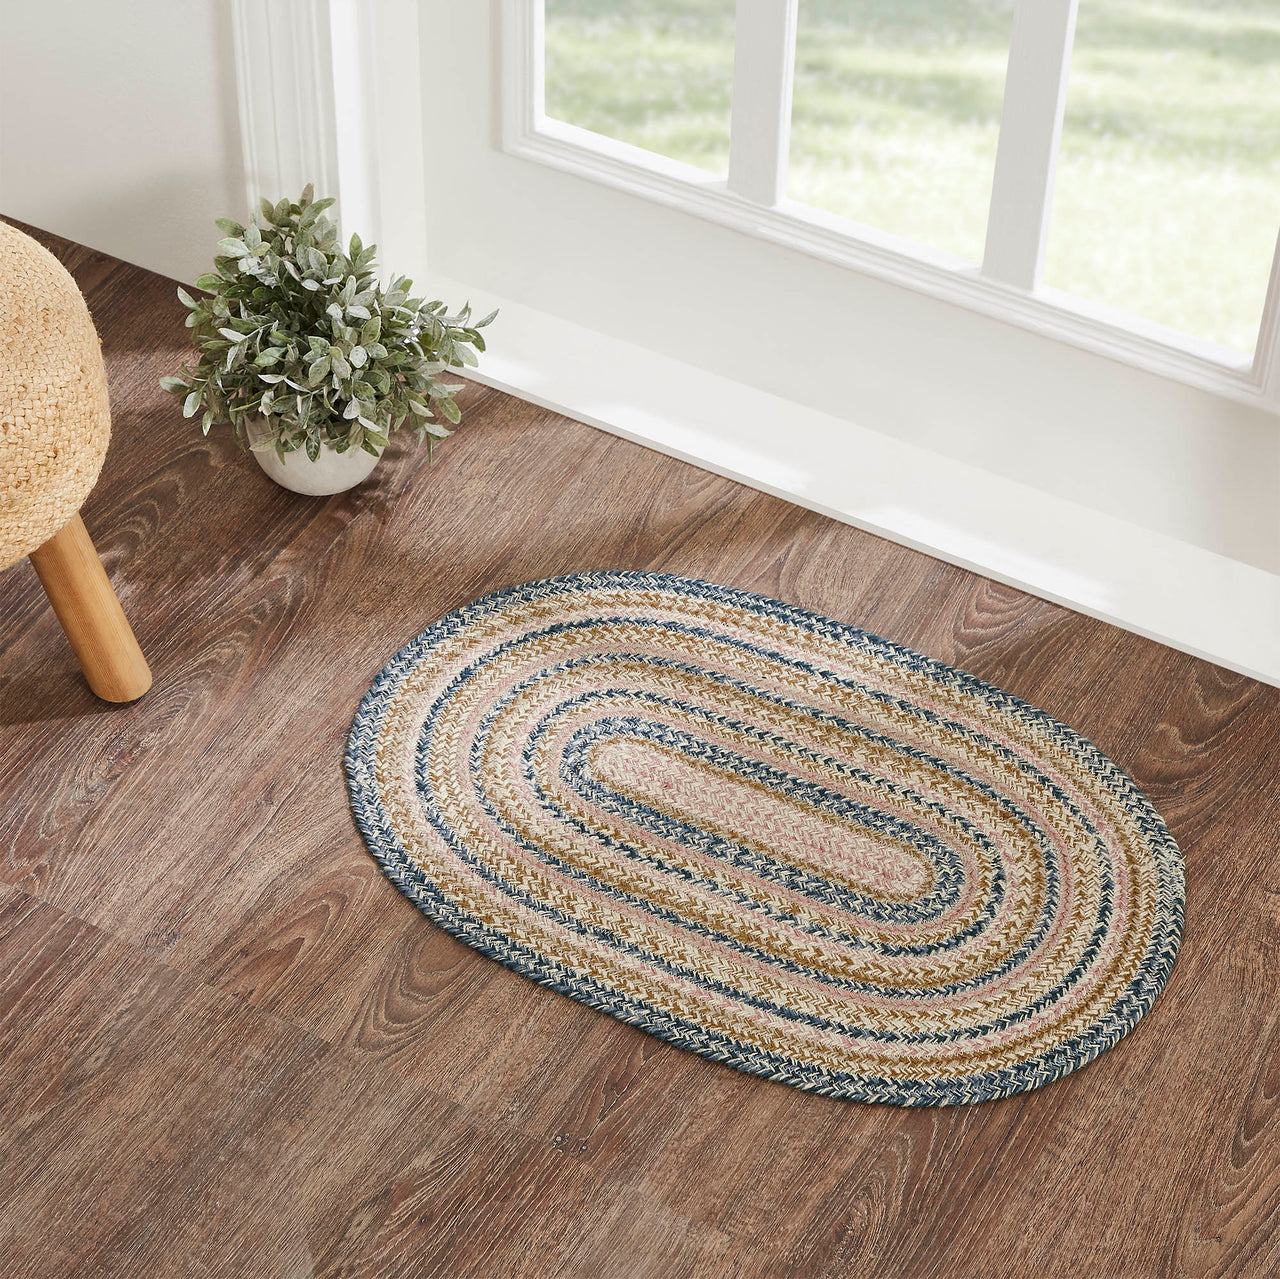 Kaila Jute Braided Rug Oval with Rug Pad 20"x30" VHC Brands